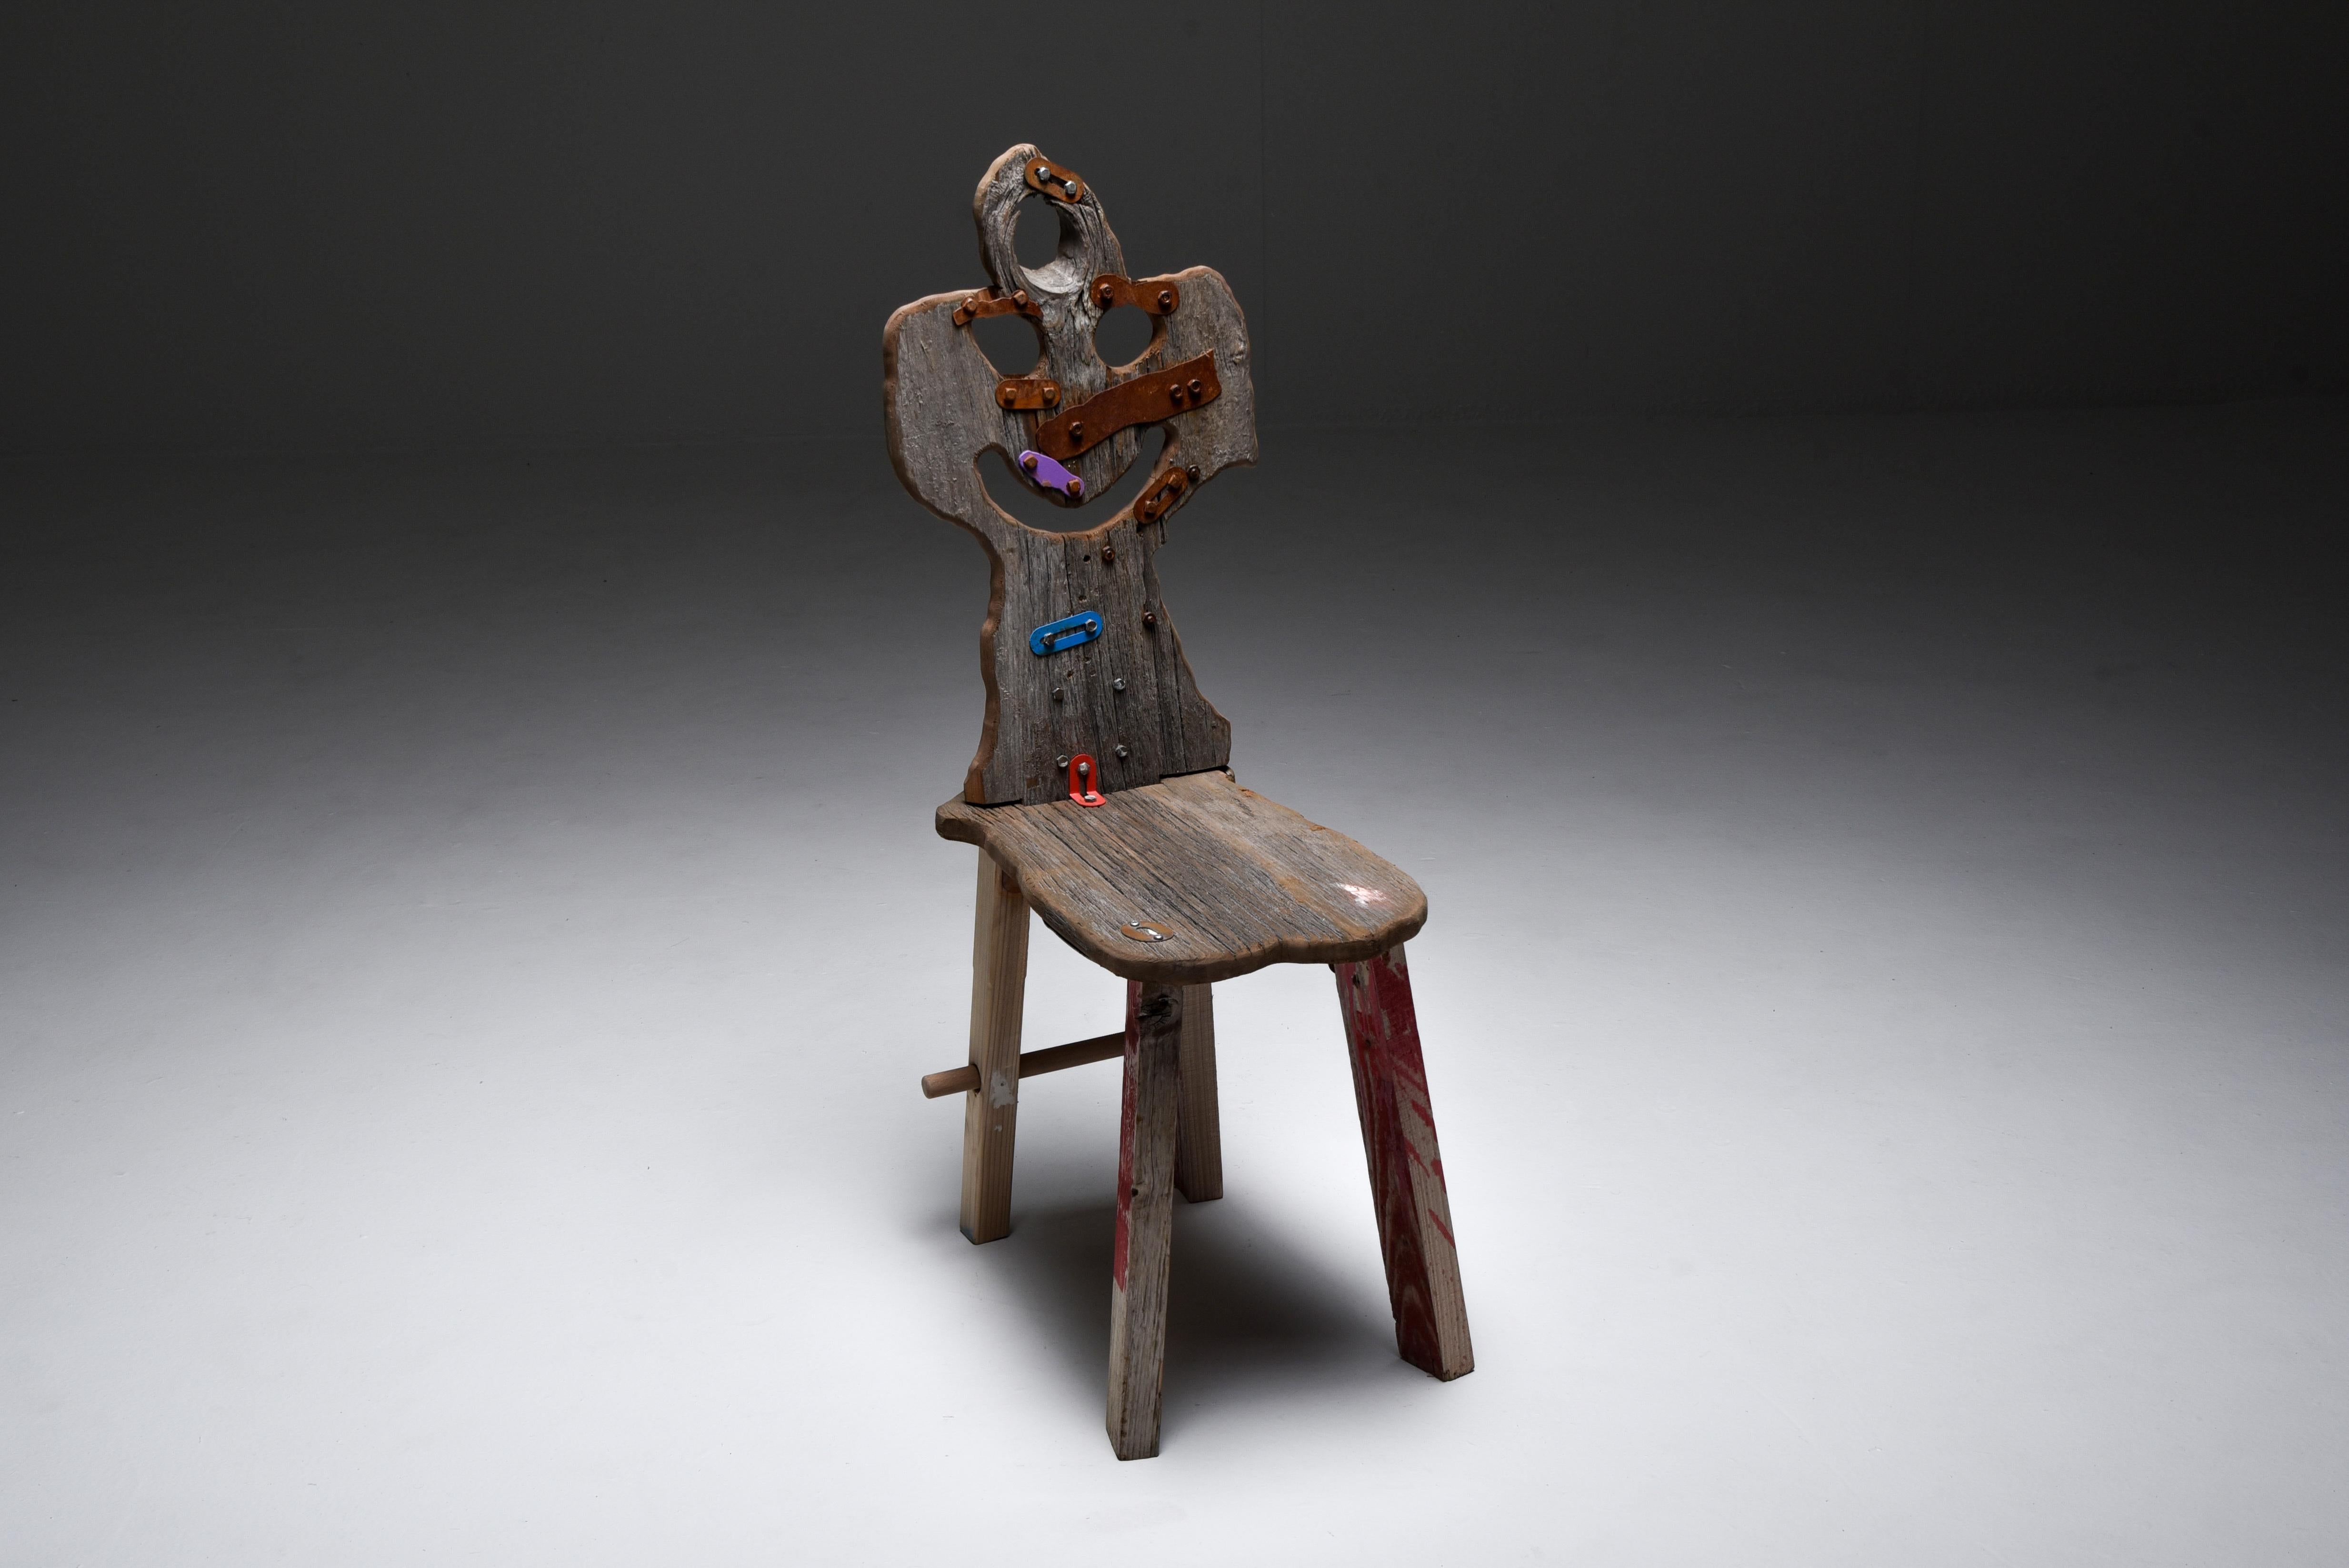 Serban Ionescu; Folks Series; Functional Art; Sculpture Chair; Armchair; Sidechair; Conversation Piece; Art; Romania; 

Folks 31, 2021

This unique piece was on view in the exhibition 